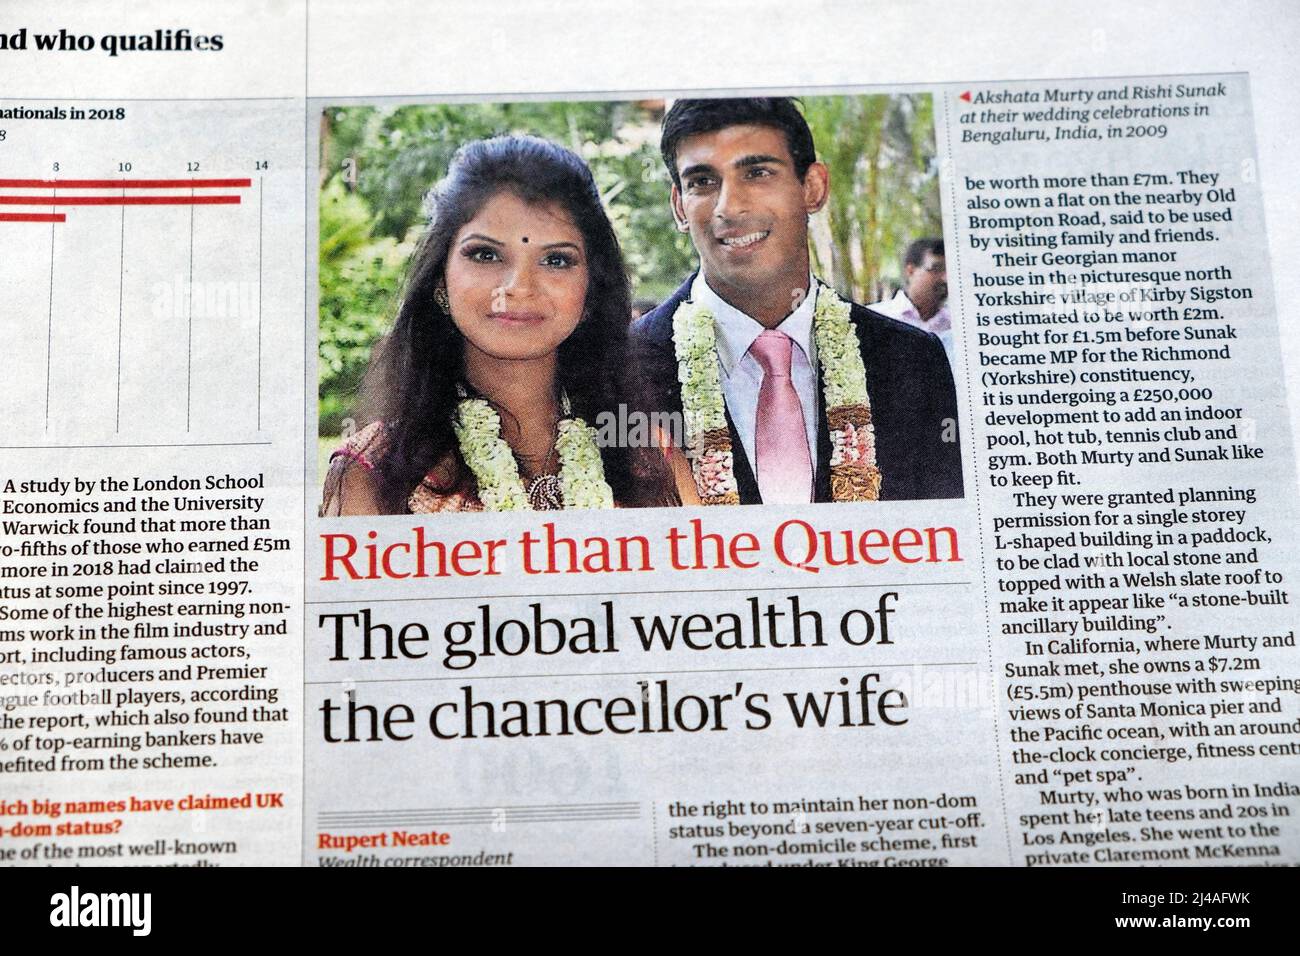 Akshata Murty 'Richer than the Queen The global wealth of the chancellor's wife' Guardian newspaper headline article clipping 7 April 2022 London UK Stock Photo